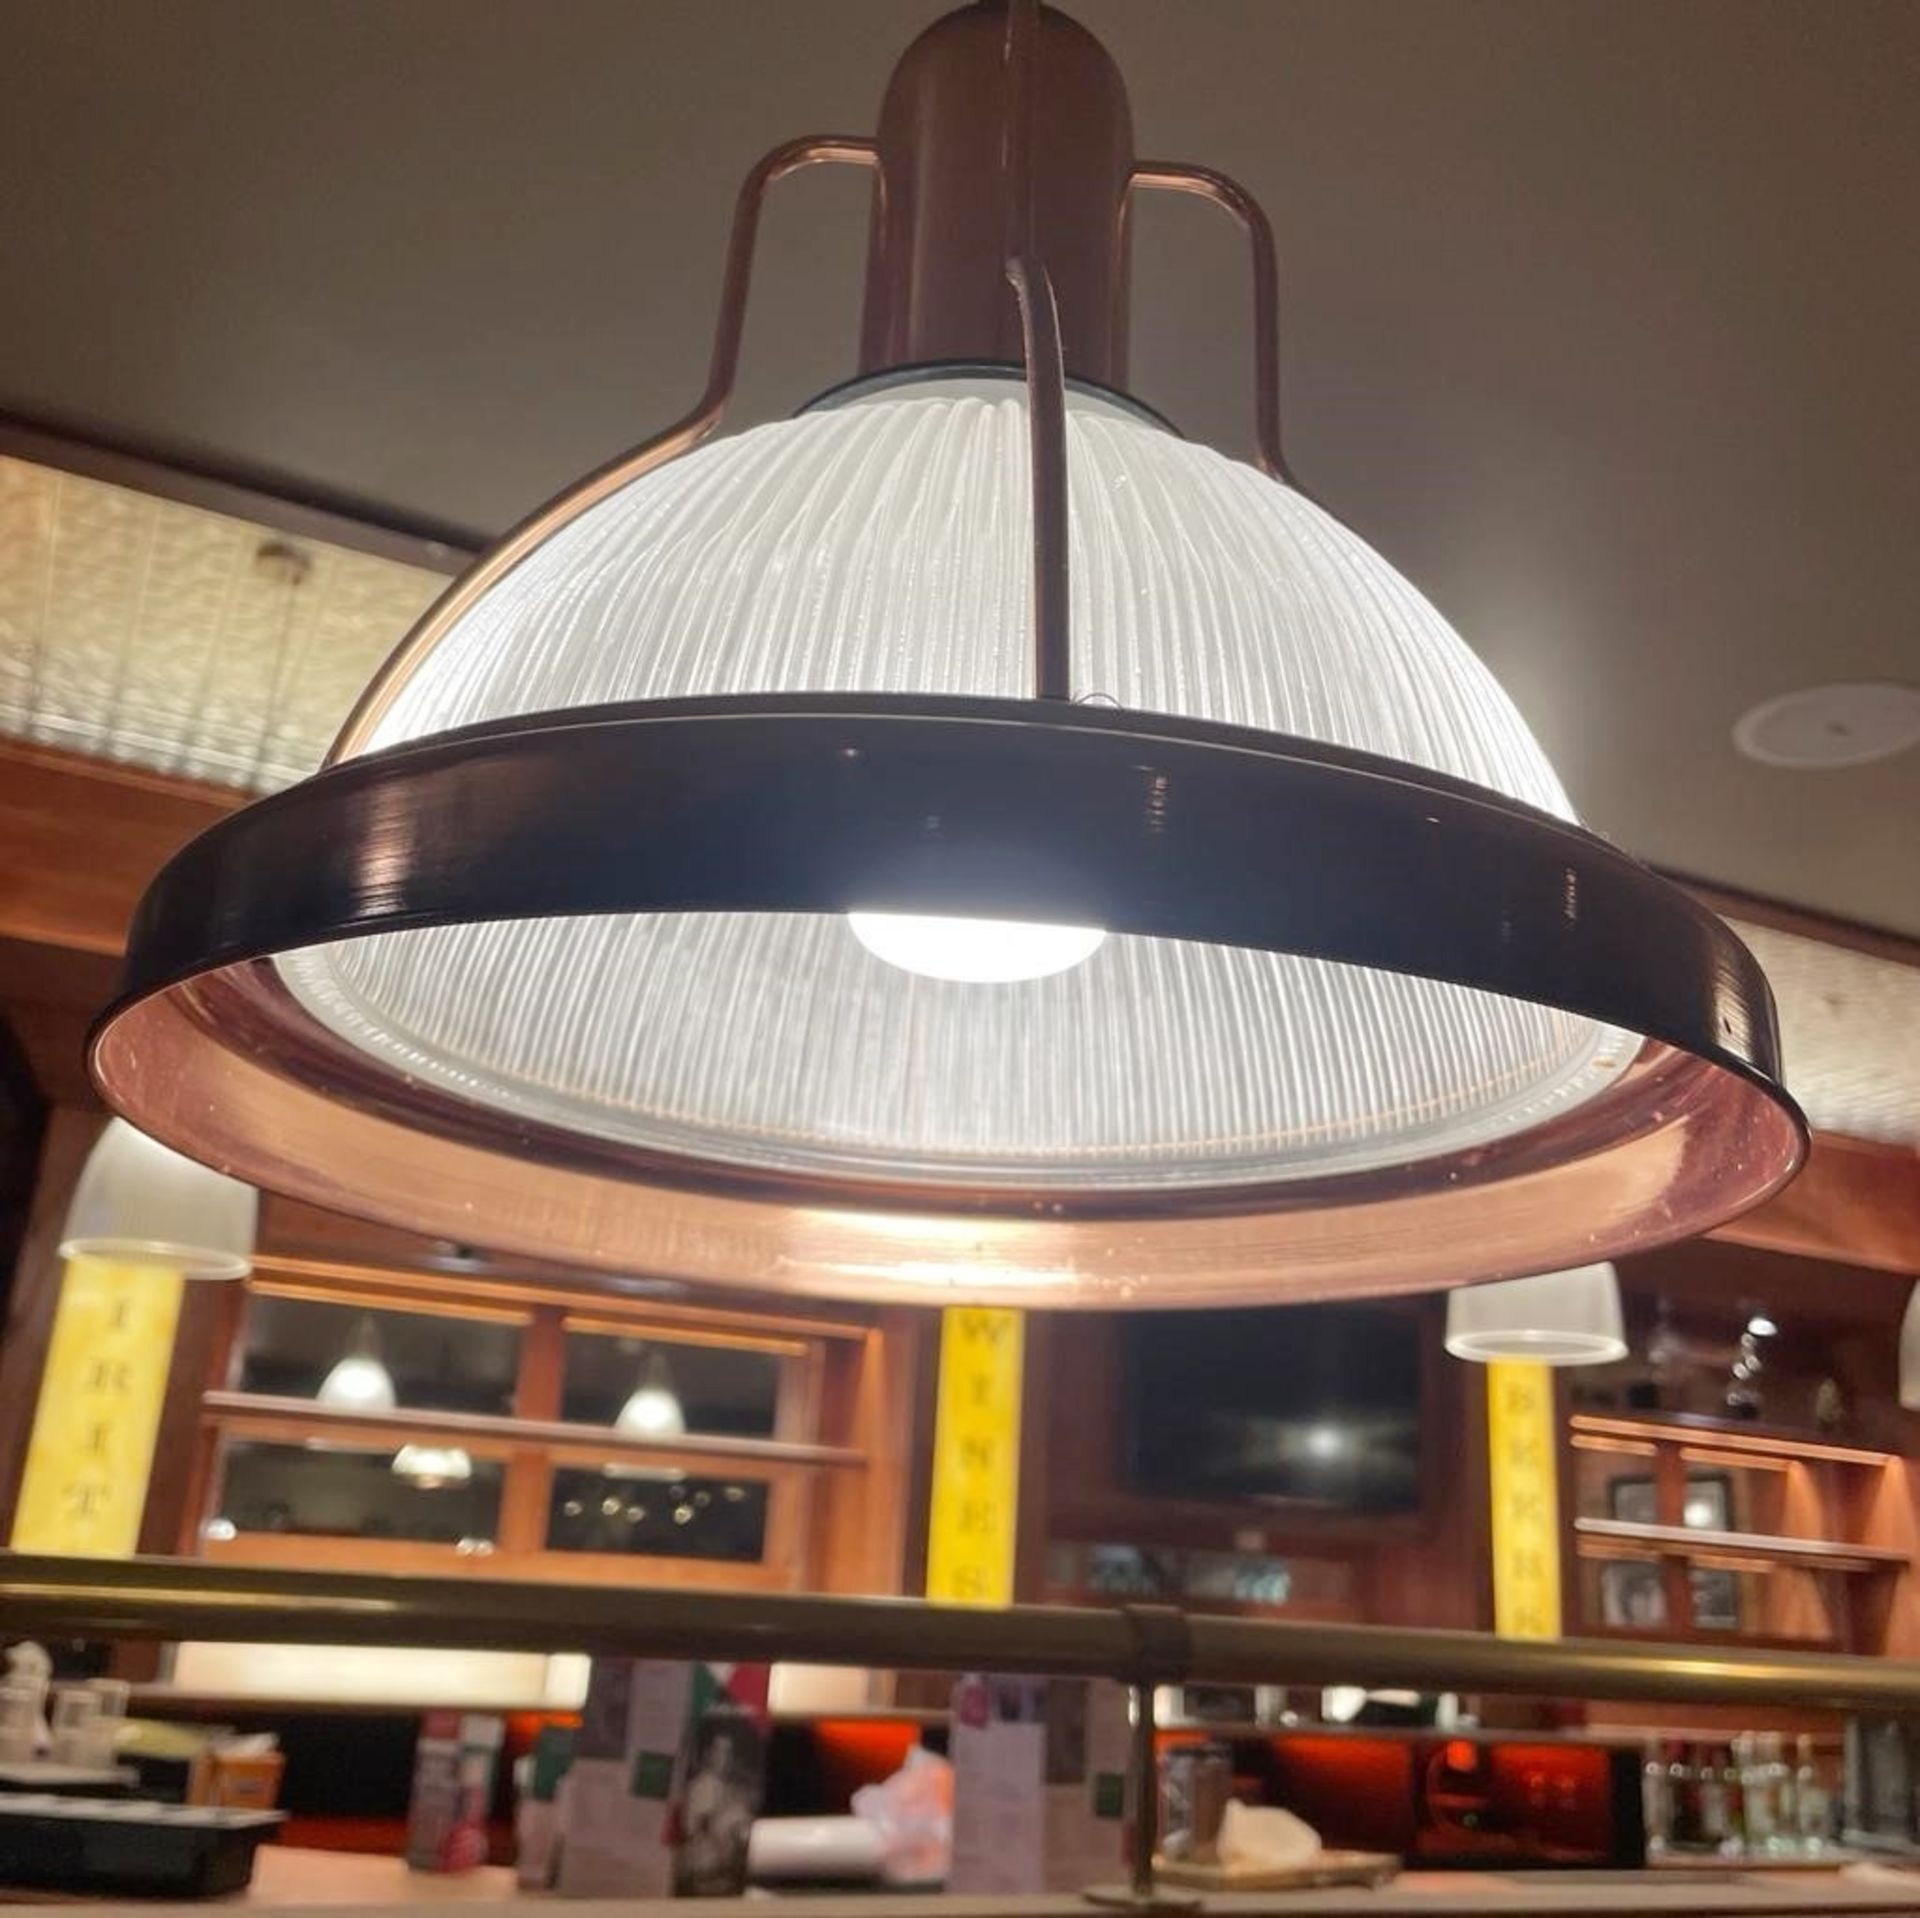 5 x Industrial-style Pendant Restaurant Light Fittings In Copper With Pleated Glass Shades - CL805 - - Image 2 of 2